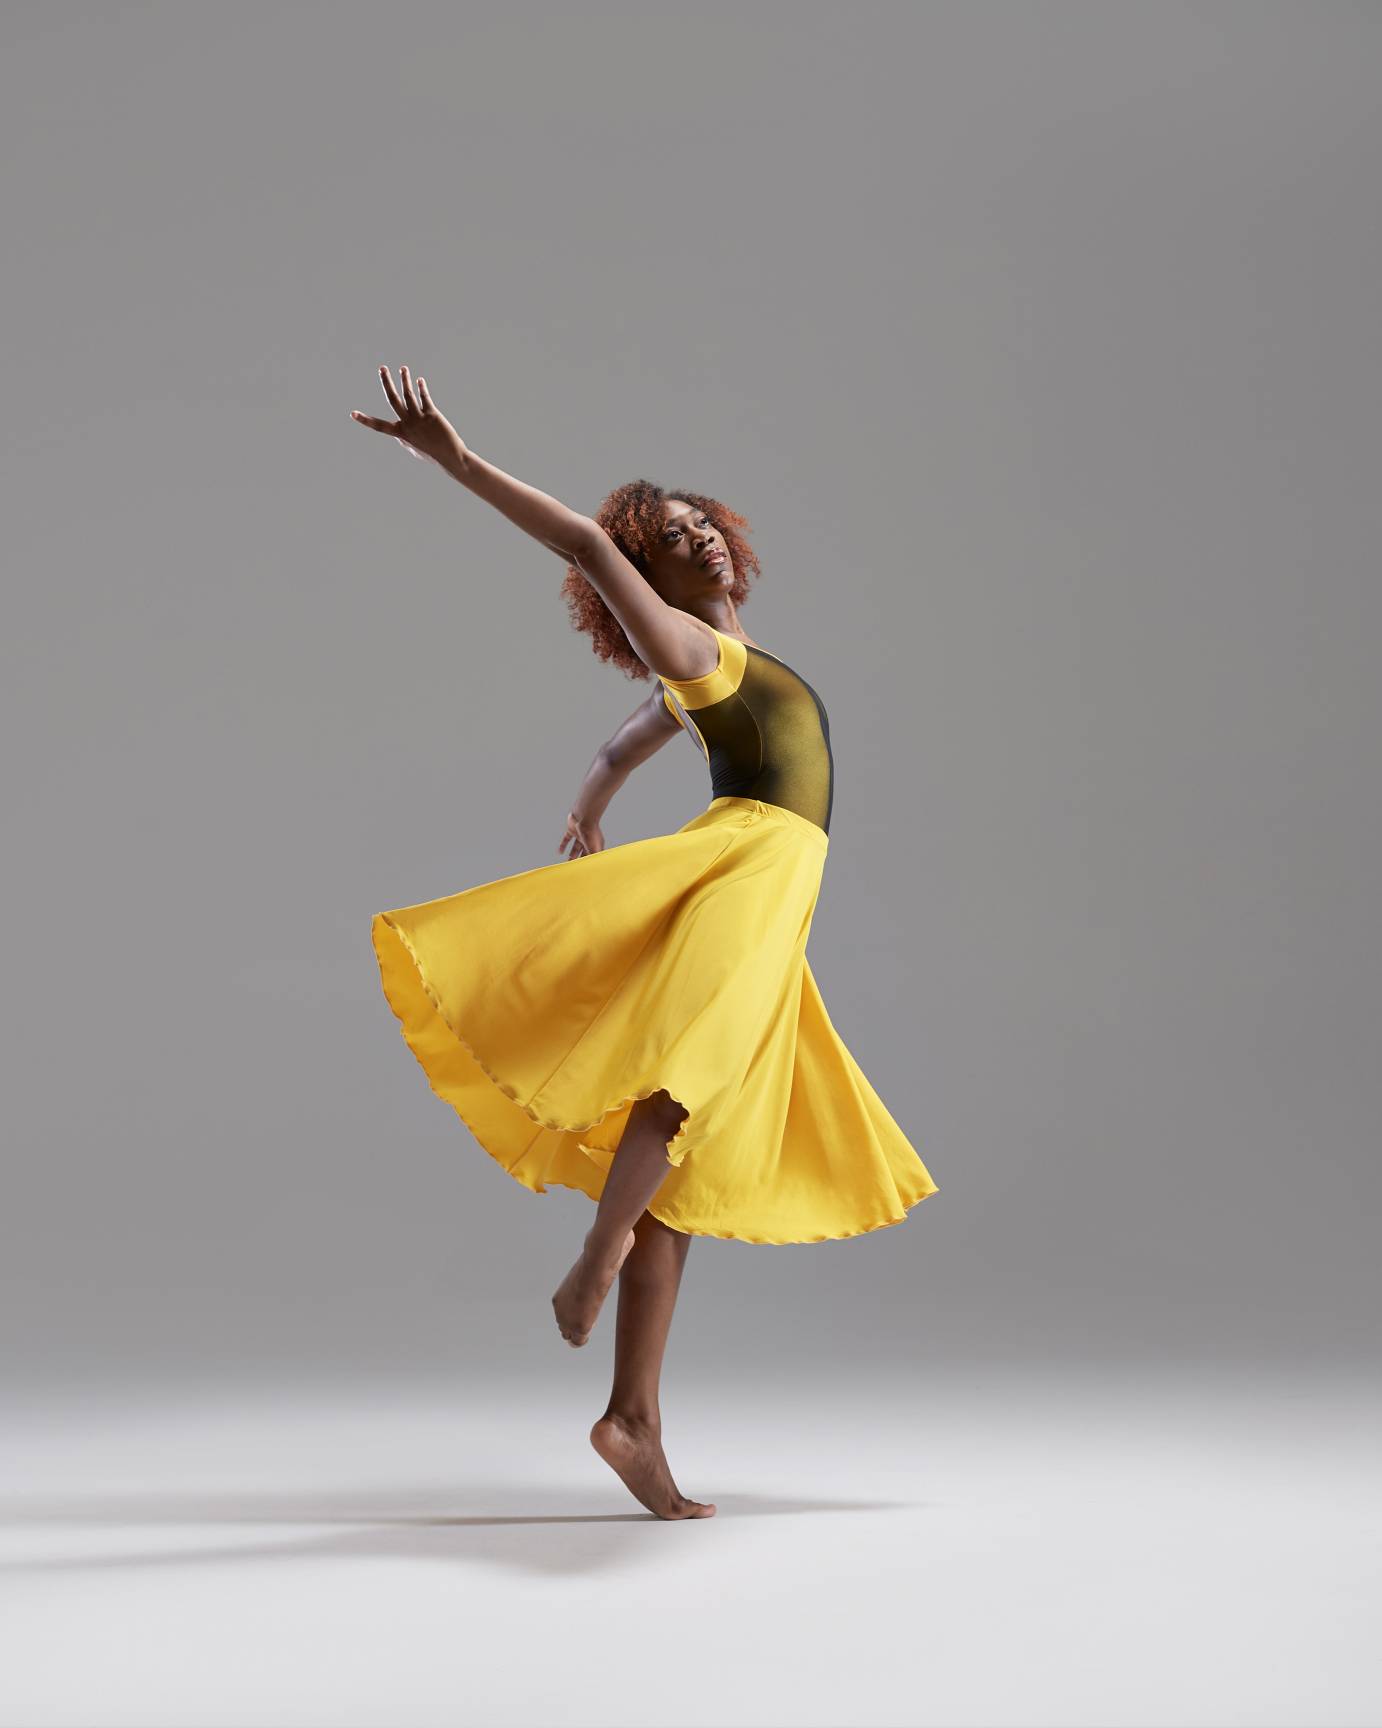 A young woman in a yellow dress swoops in an elegant pose